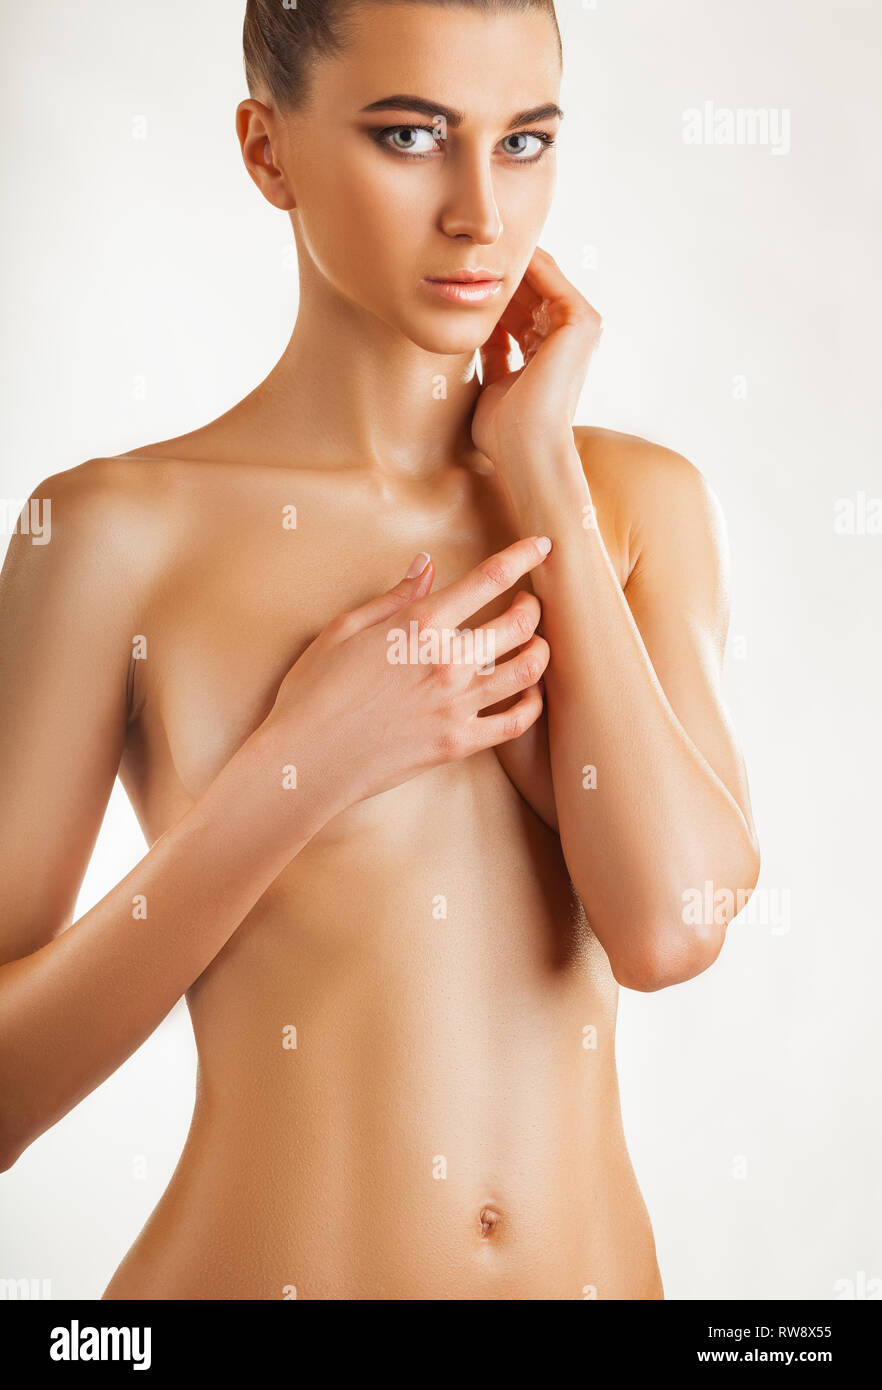 Slim Girl Cover Her Small Breast On White Background Stock Photo, Picture  and Royalty Free Image. Image 62990300.